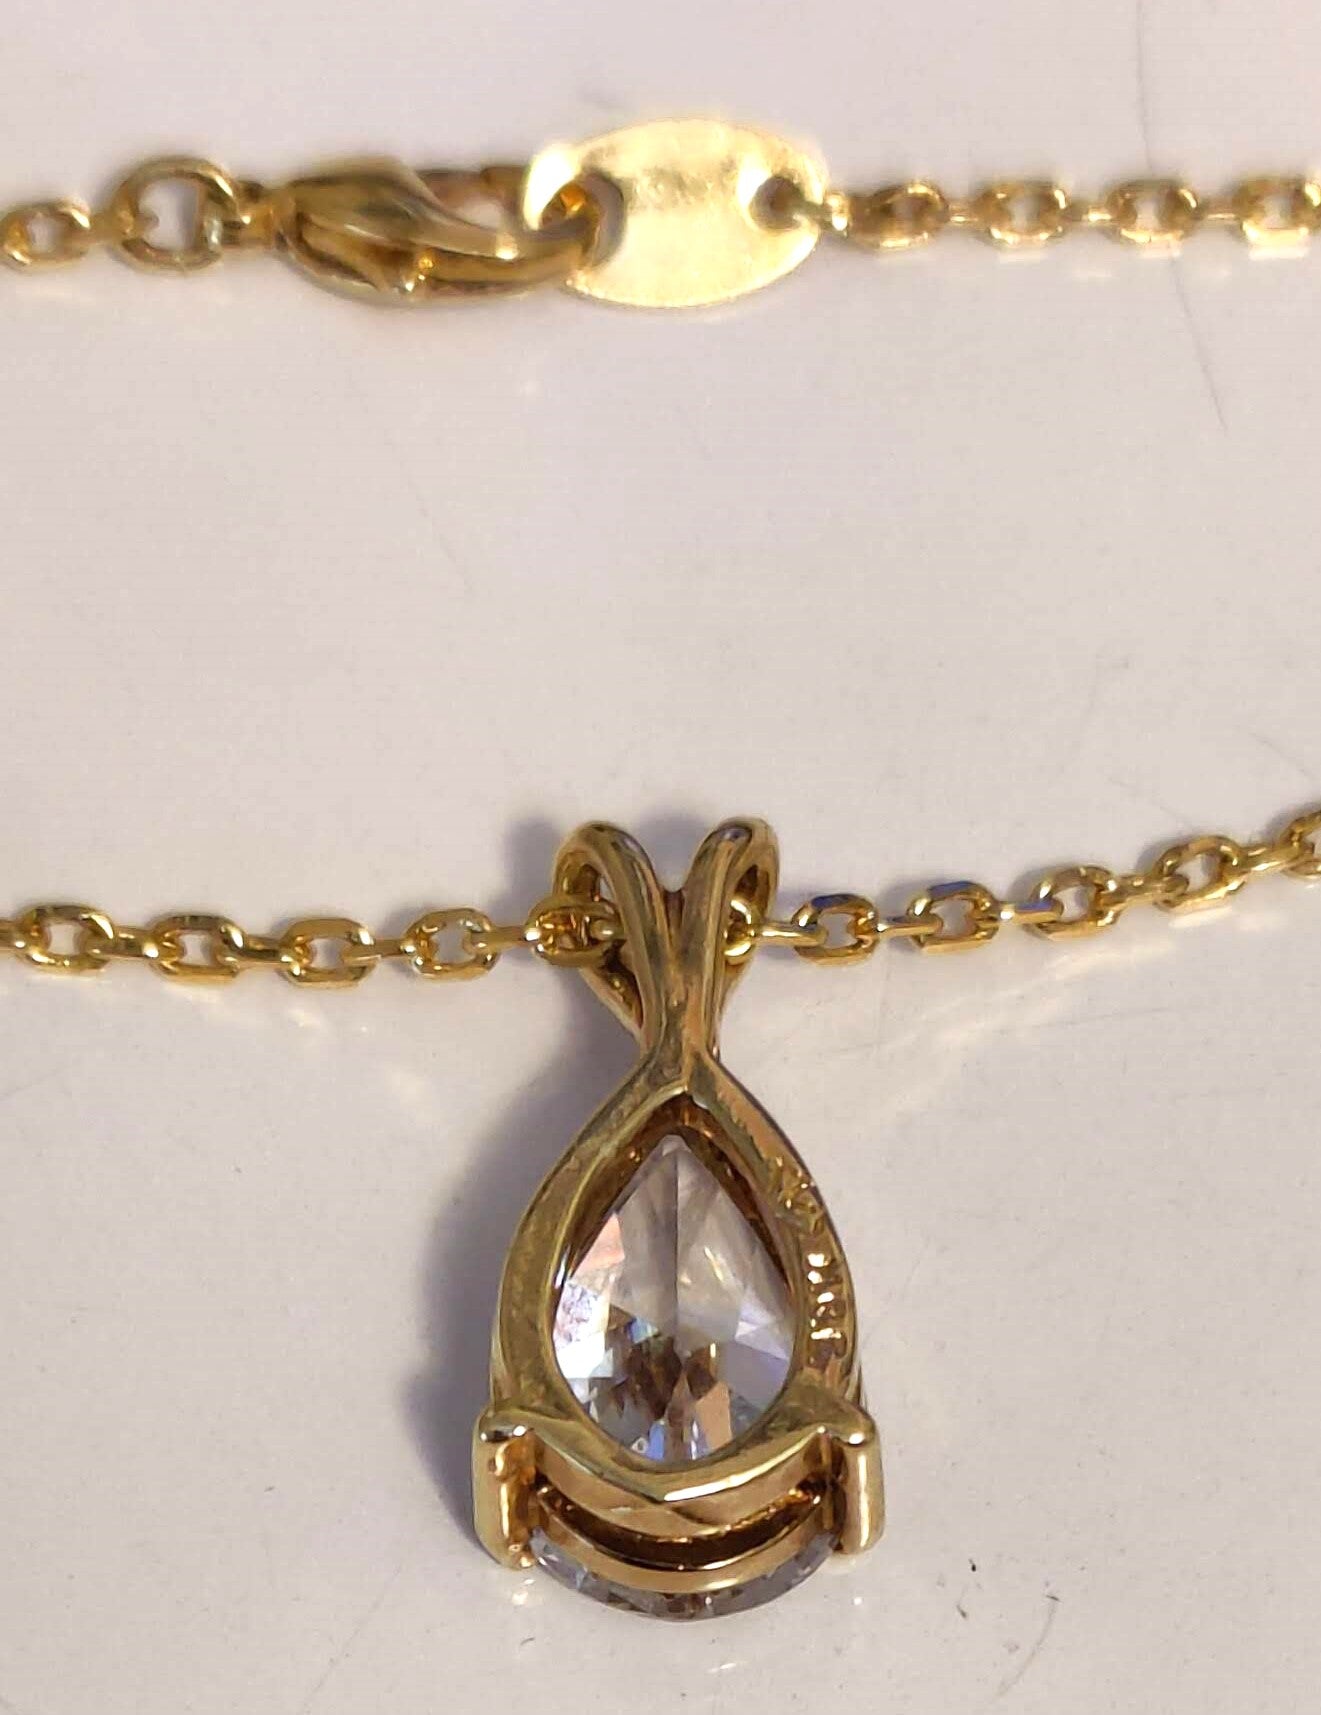 Beautiful Pear-shape Clear Faceted Stone Mounted in Gold-tone Pendant w/20" Chain